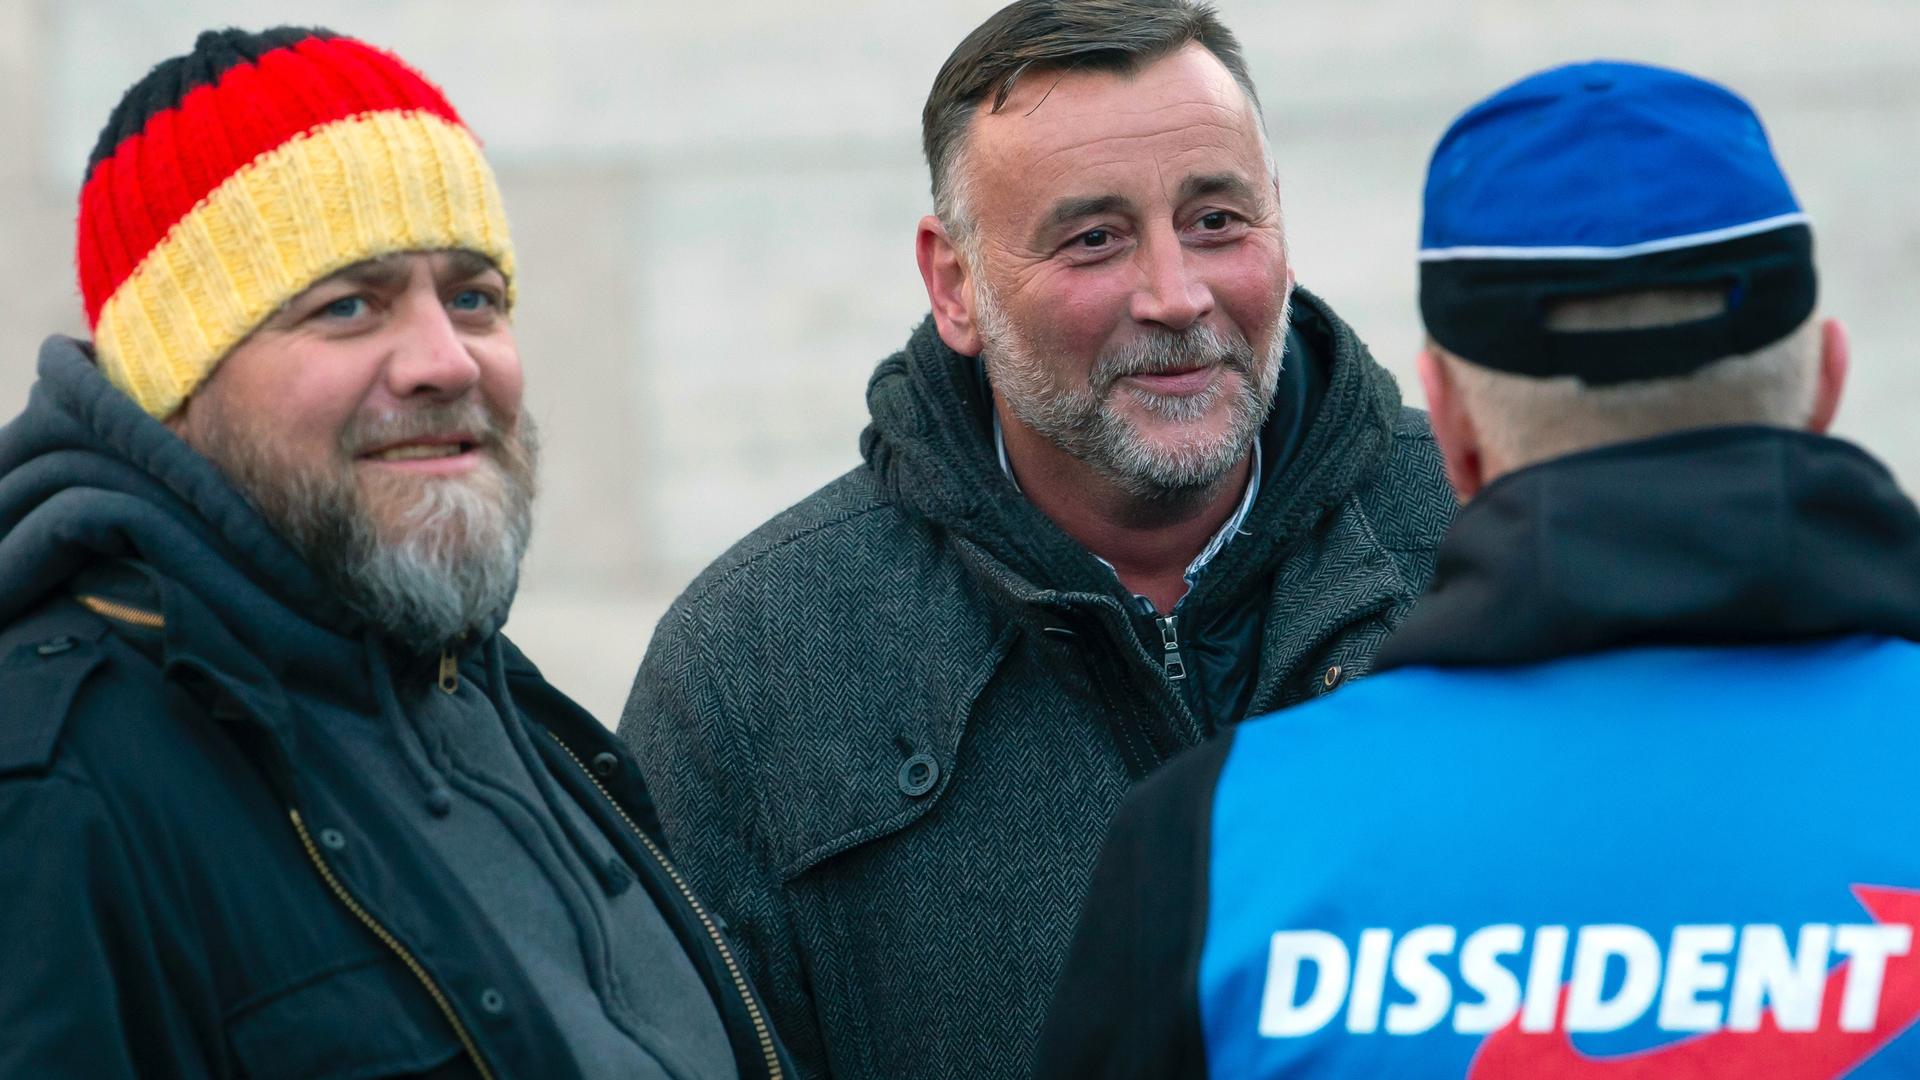 Three white men stand together outside. One wears a hat with German flag colors. One's blue shirt back reads "Dissident."